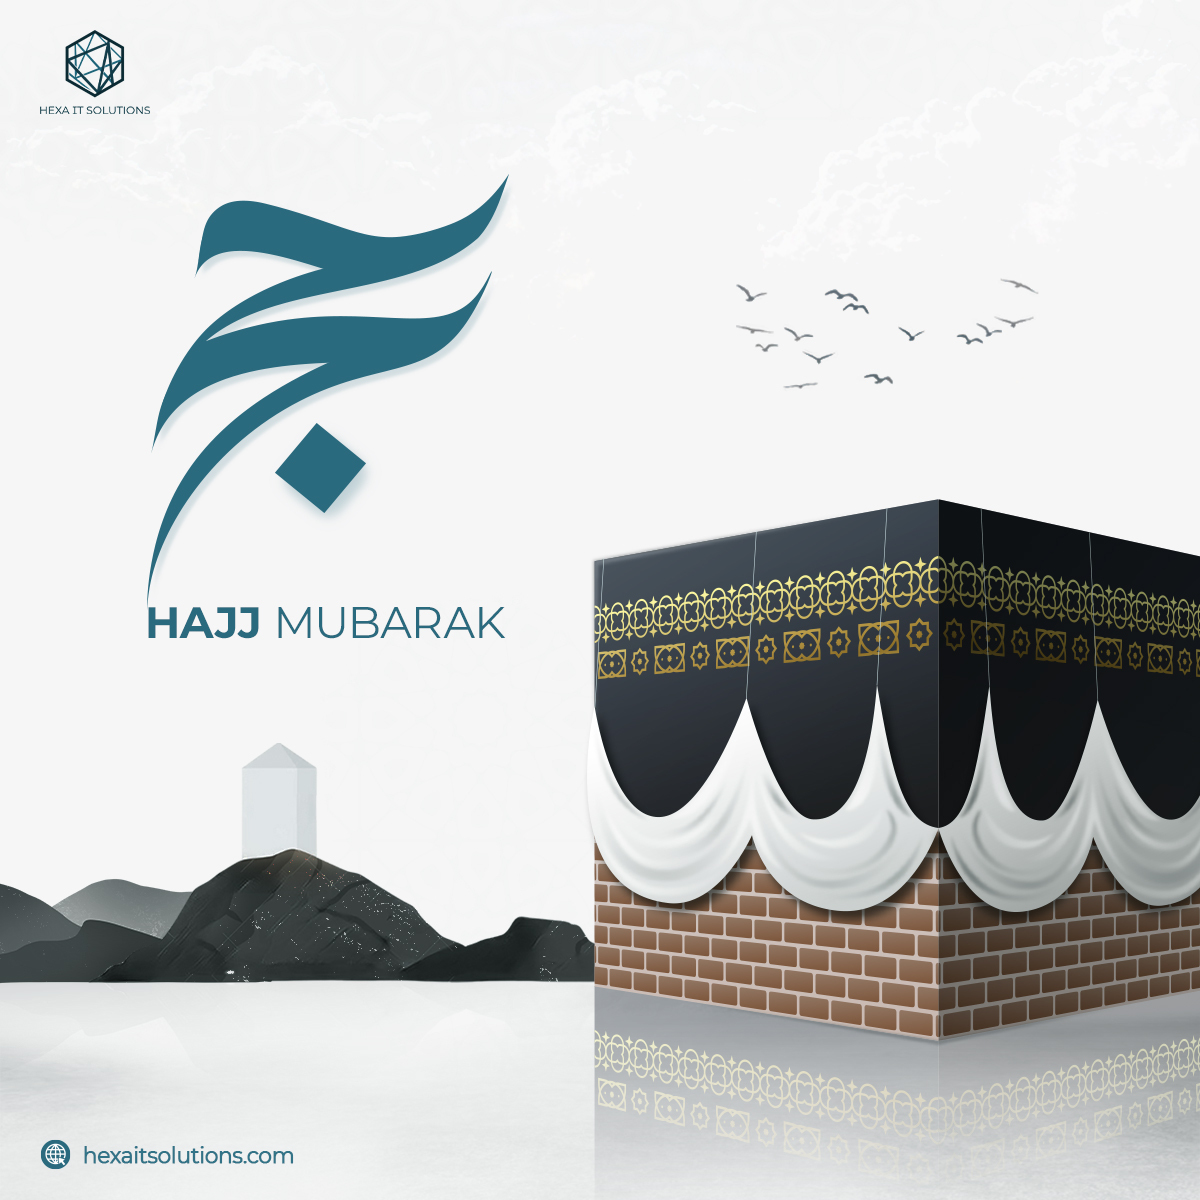 Hajj Mubarak! On this blessed occasion, Hexa IT Solutions wishes you a journey of spiritual fulfillment and divine blessings during the sacred pilgrimage.
Visit Now: hexaitsolutions.com

#Hajj #HajjMubarak #Pilgrimage #SpiritualJourney #DivineBlessings #SacredPilgrimage